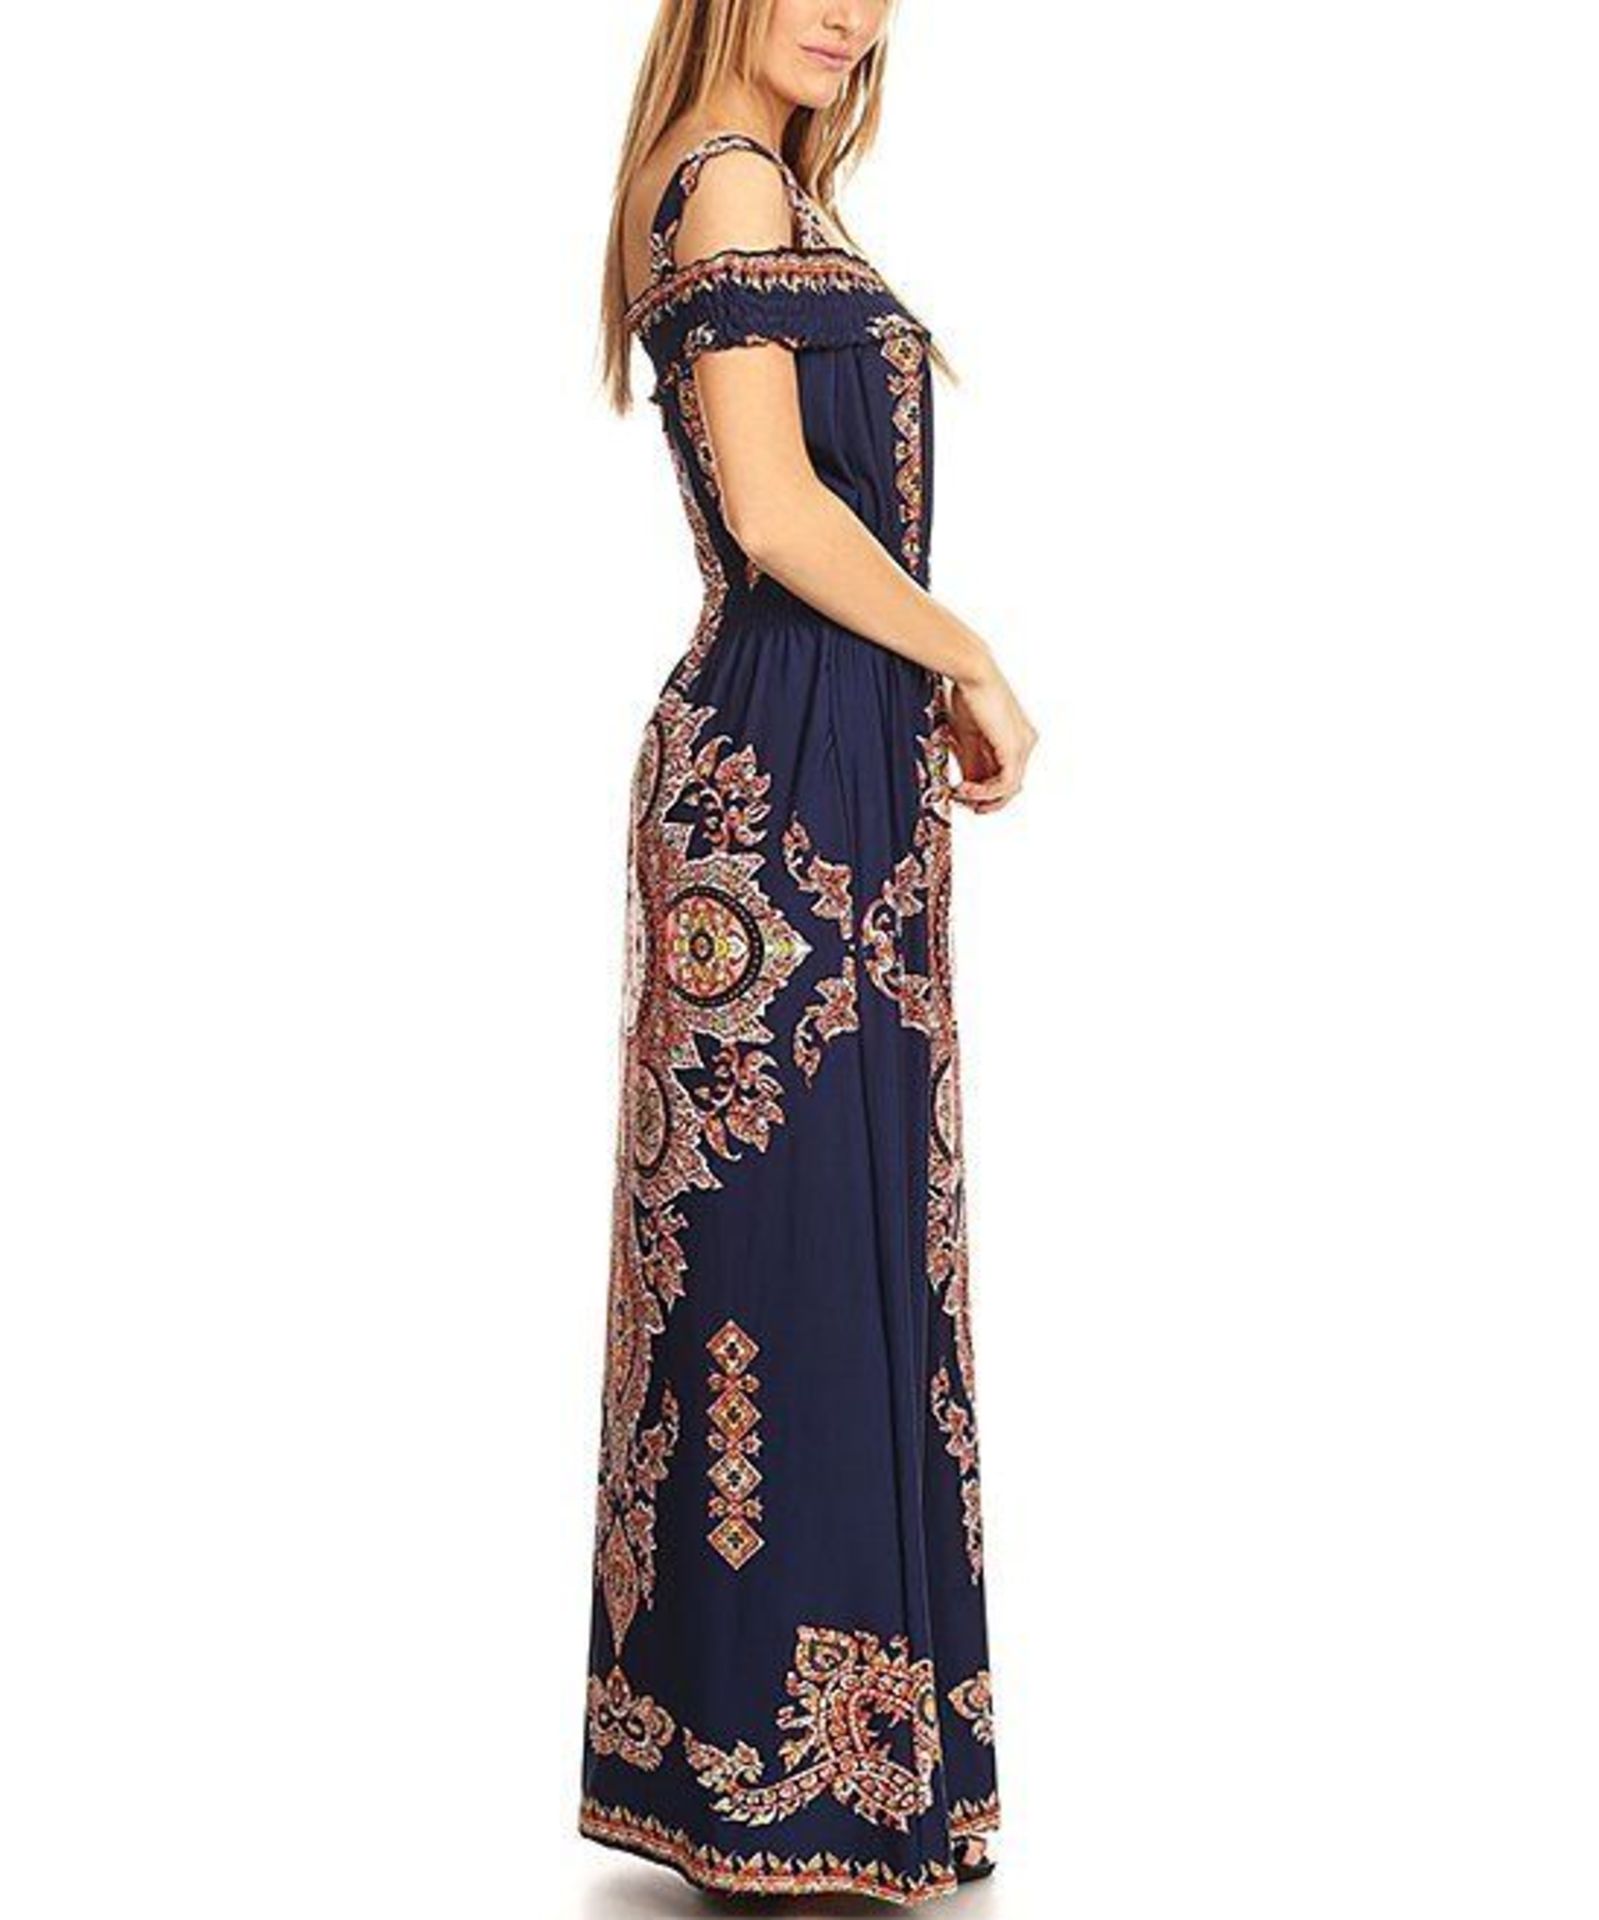 Bellaberry Usa Navy Geometric Off-Shoulder Maxi Dress - Plus(Uk 22/24:Us 18/20) (New With Tags) [ - Image 3 of 3